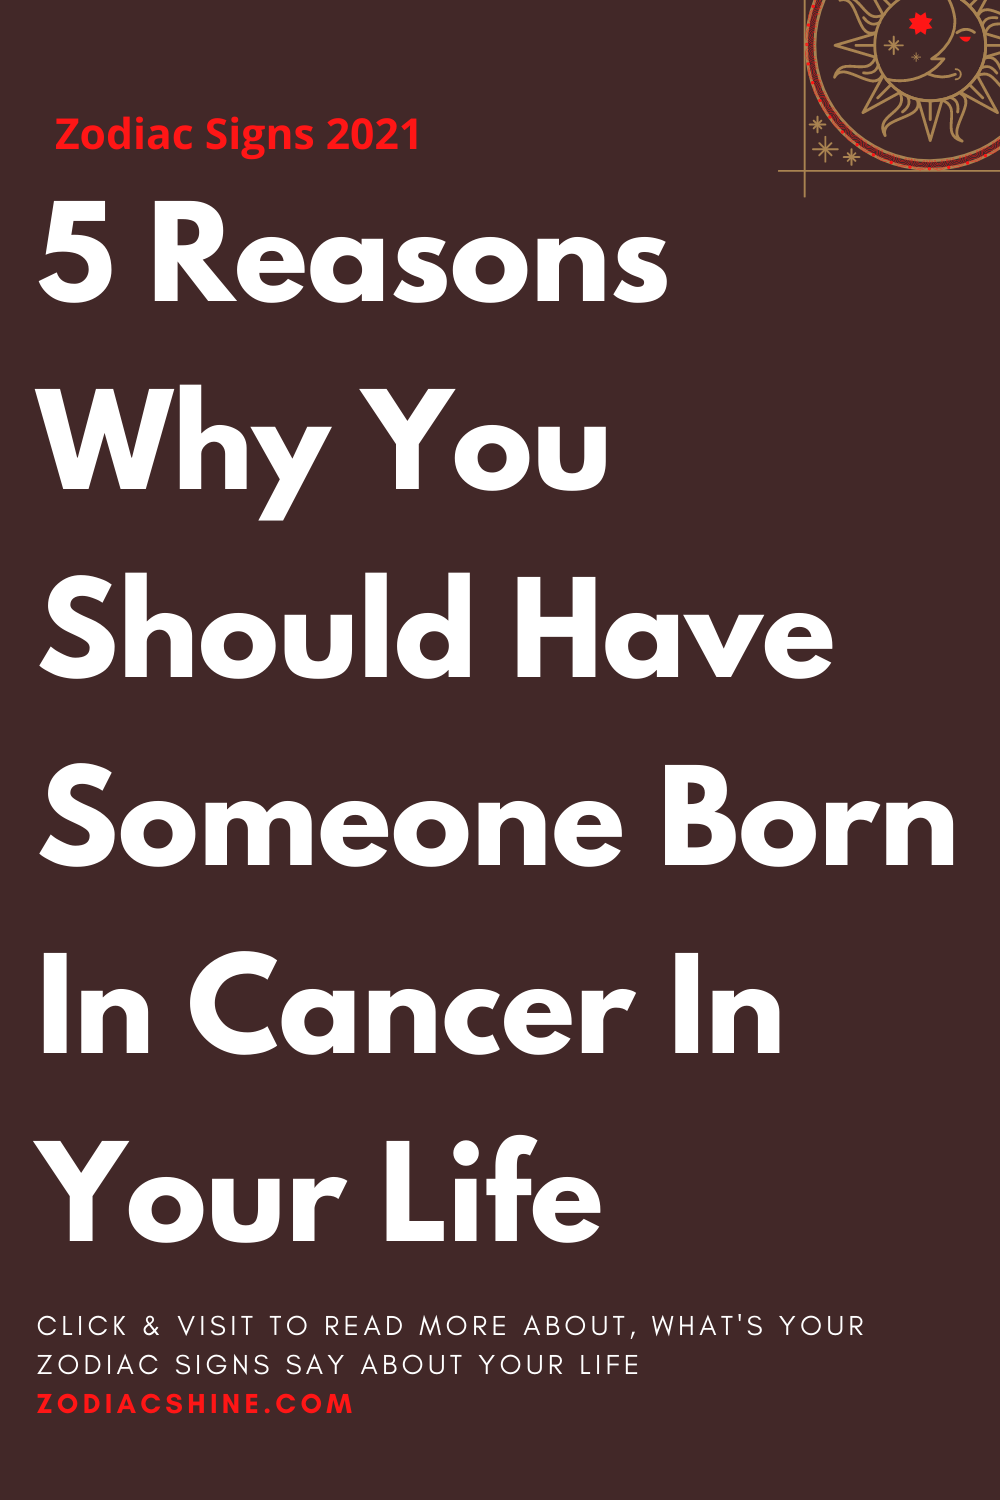 5 Reasons Why You Should Have Someone Born In Cancer In Your Life